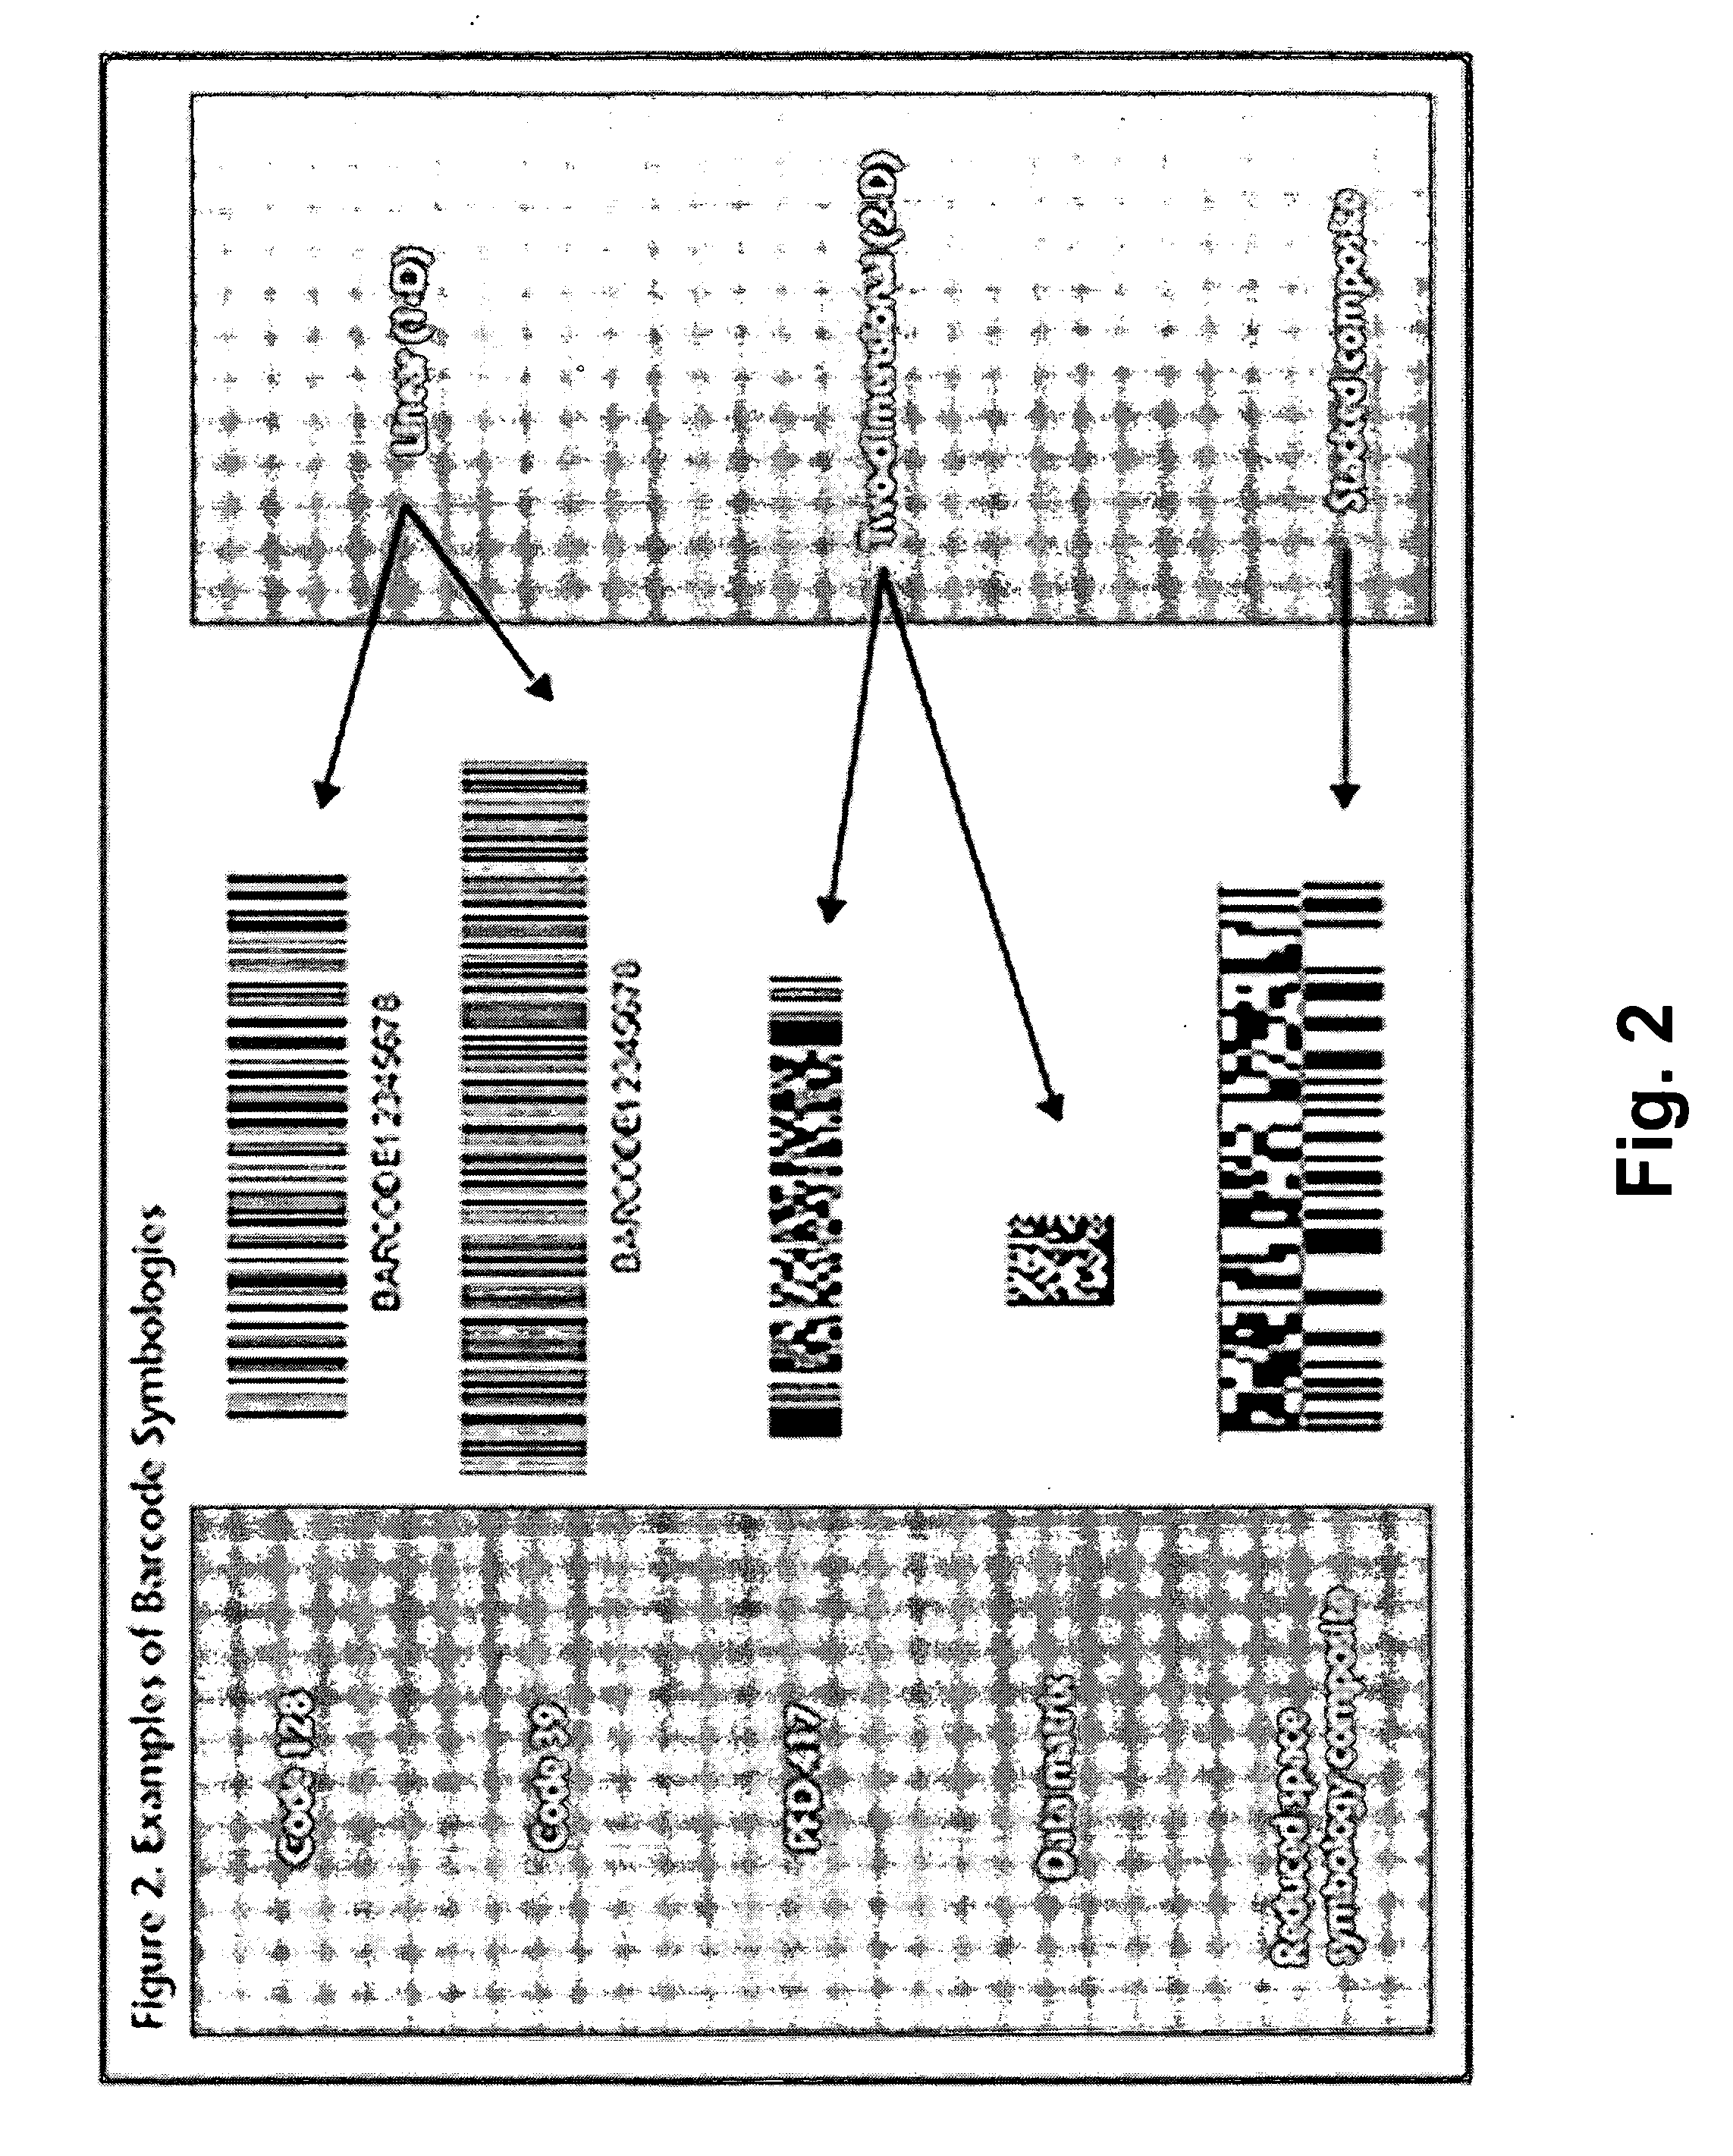 Systems and methods for processing measurement data